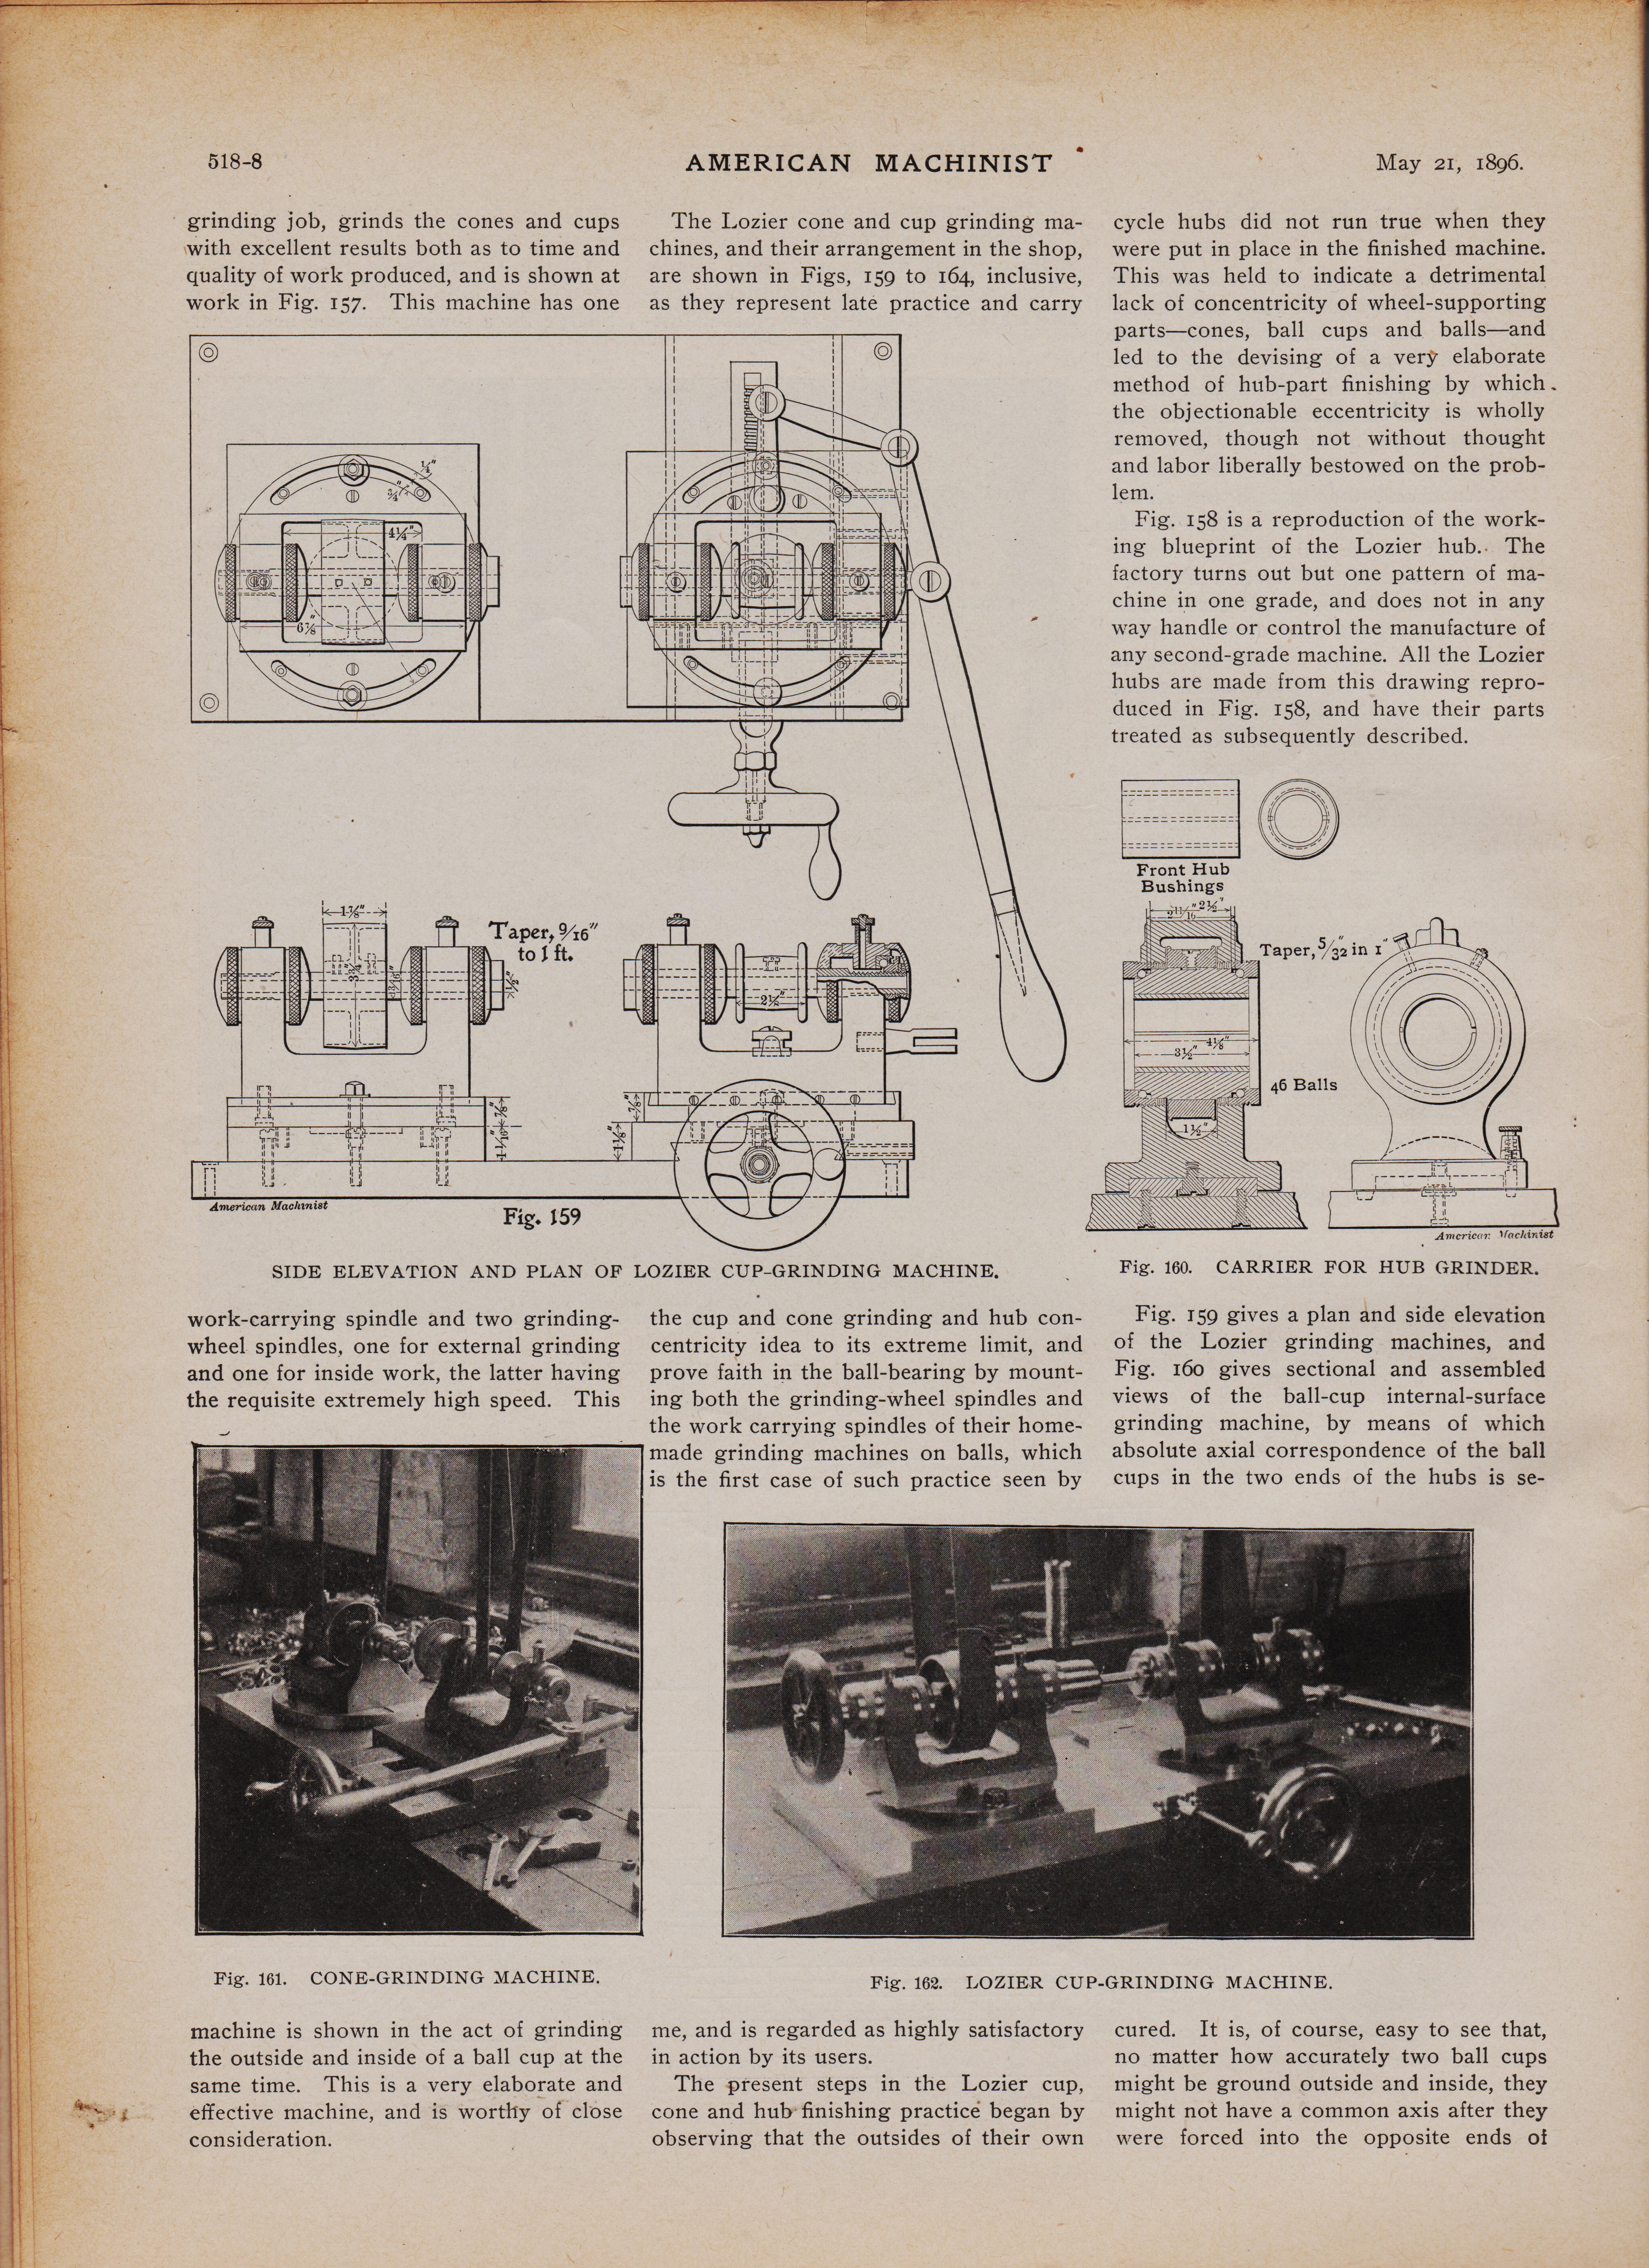 https://antiquemachinery.com/images-1896/American-Machinist-Feb-12-1887-May-1-pg-6-fixture-for-ginding-profile-cutters-a-plugged-safty-valve.jpeg